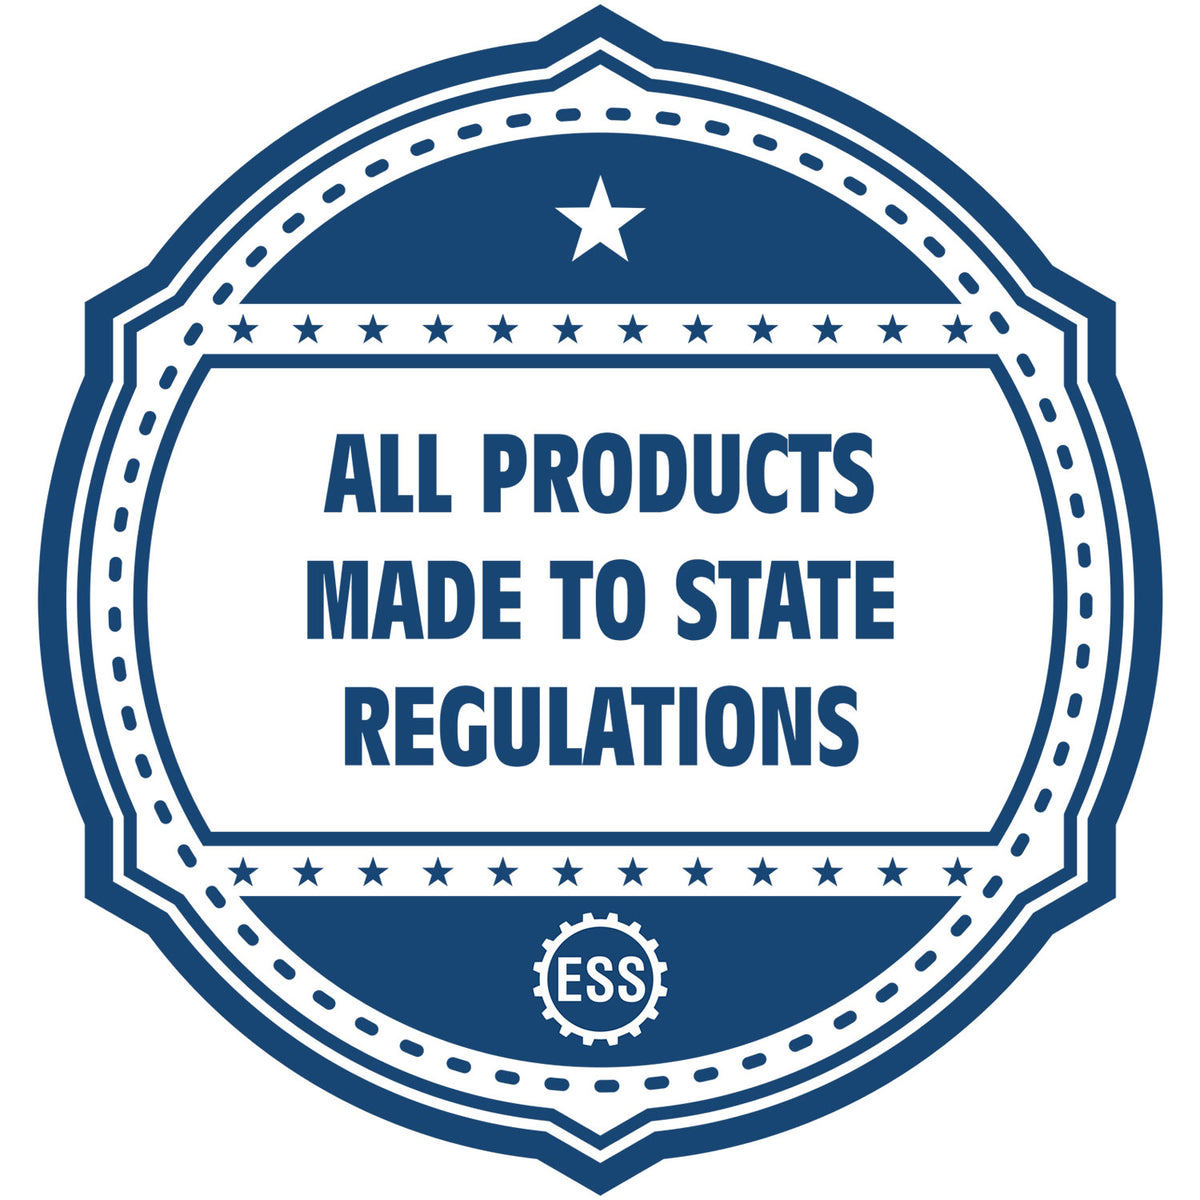 An icon or badge element for the Kentucky Engineer Desk Seal showing that this product is made in compliance with state regulations.